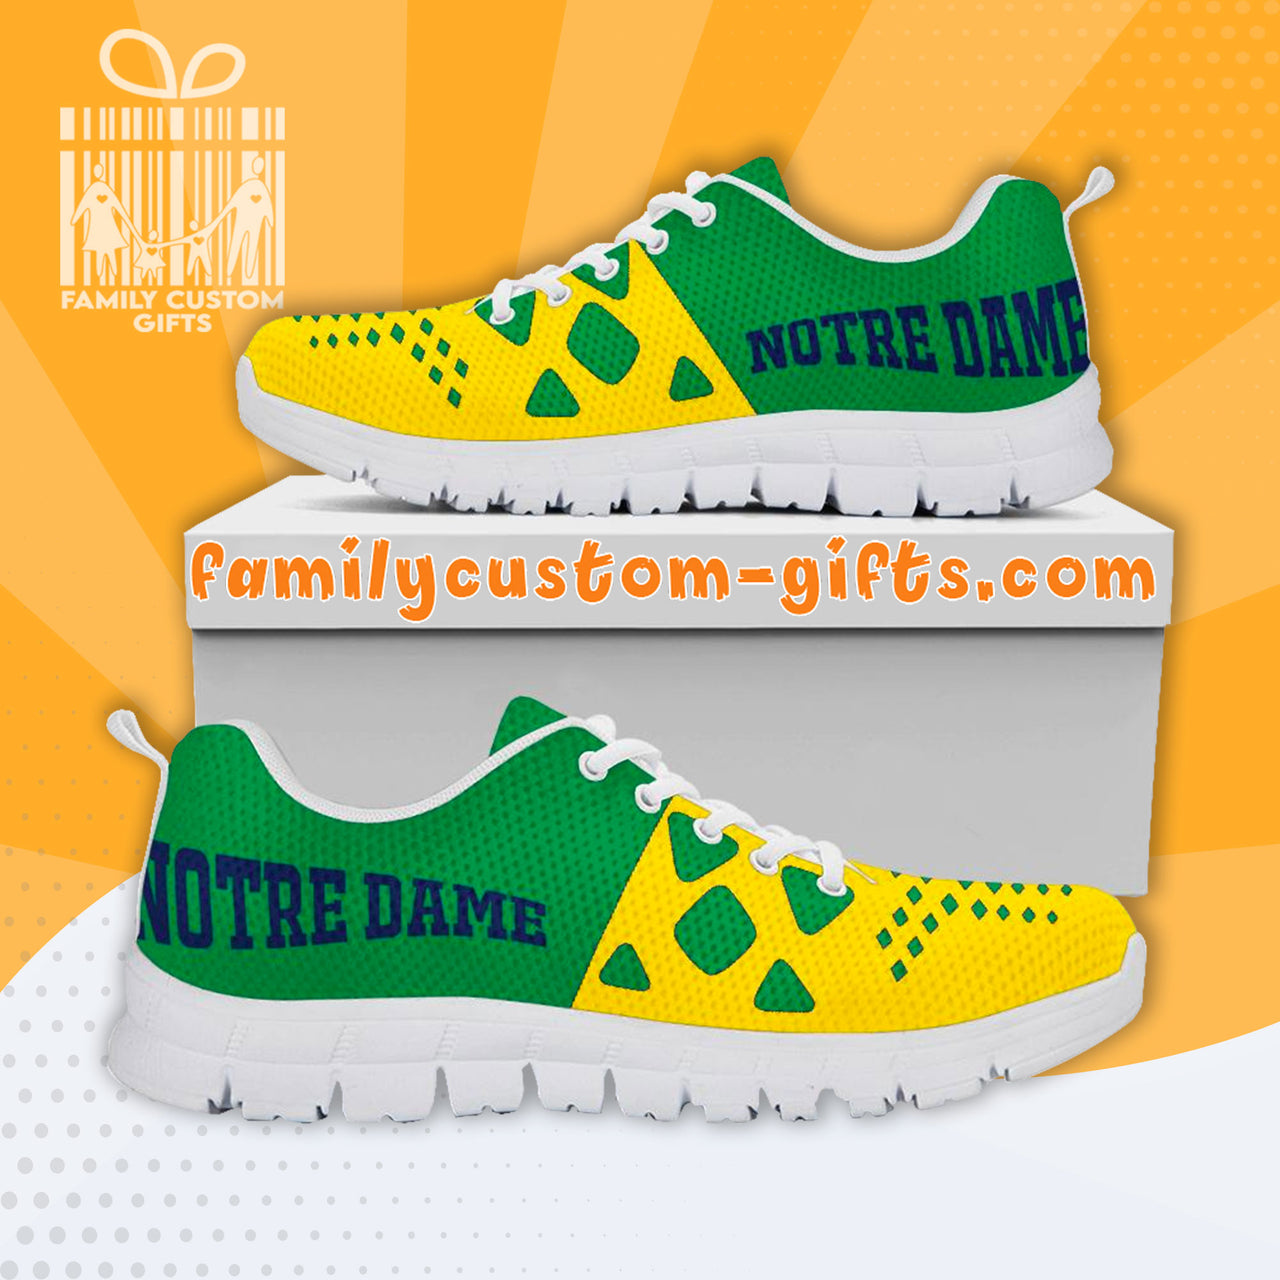 Custom Shoes for Men Women 3D Print Fashion Sneaker Gifts for Her Him